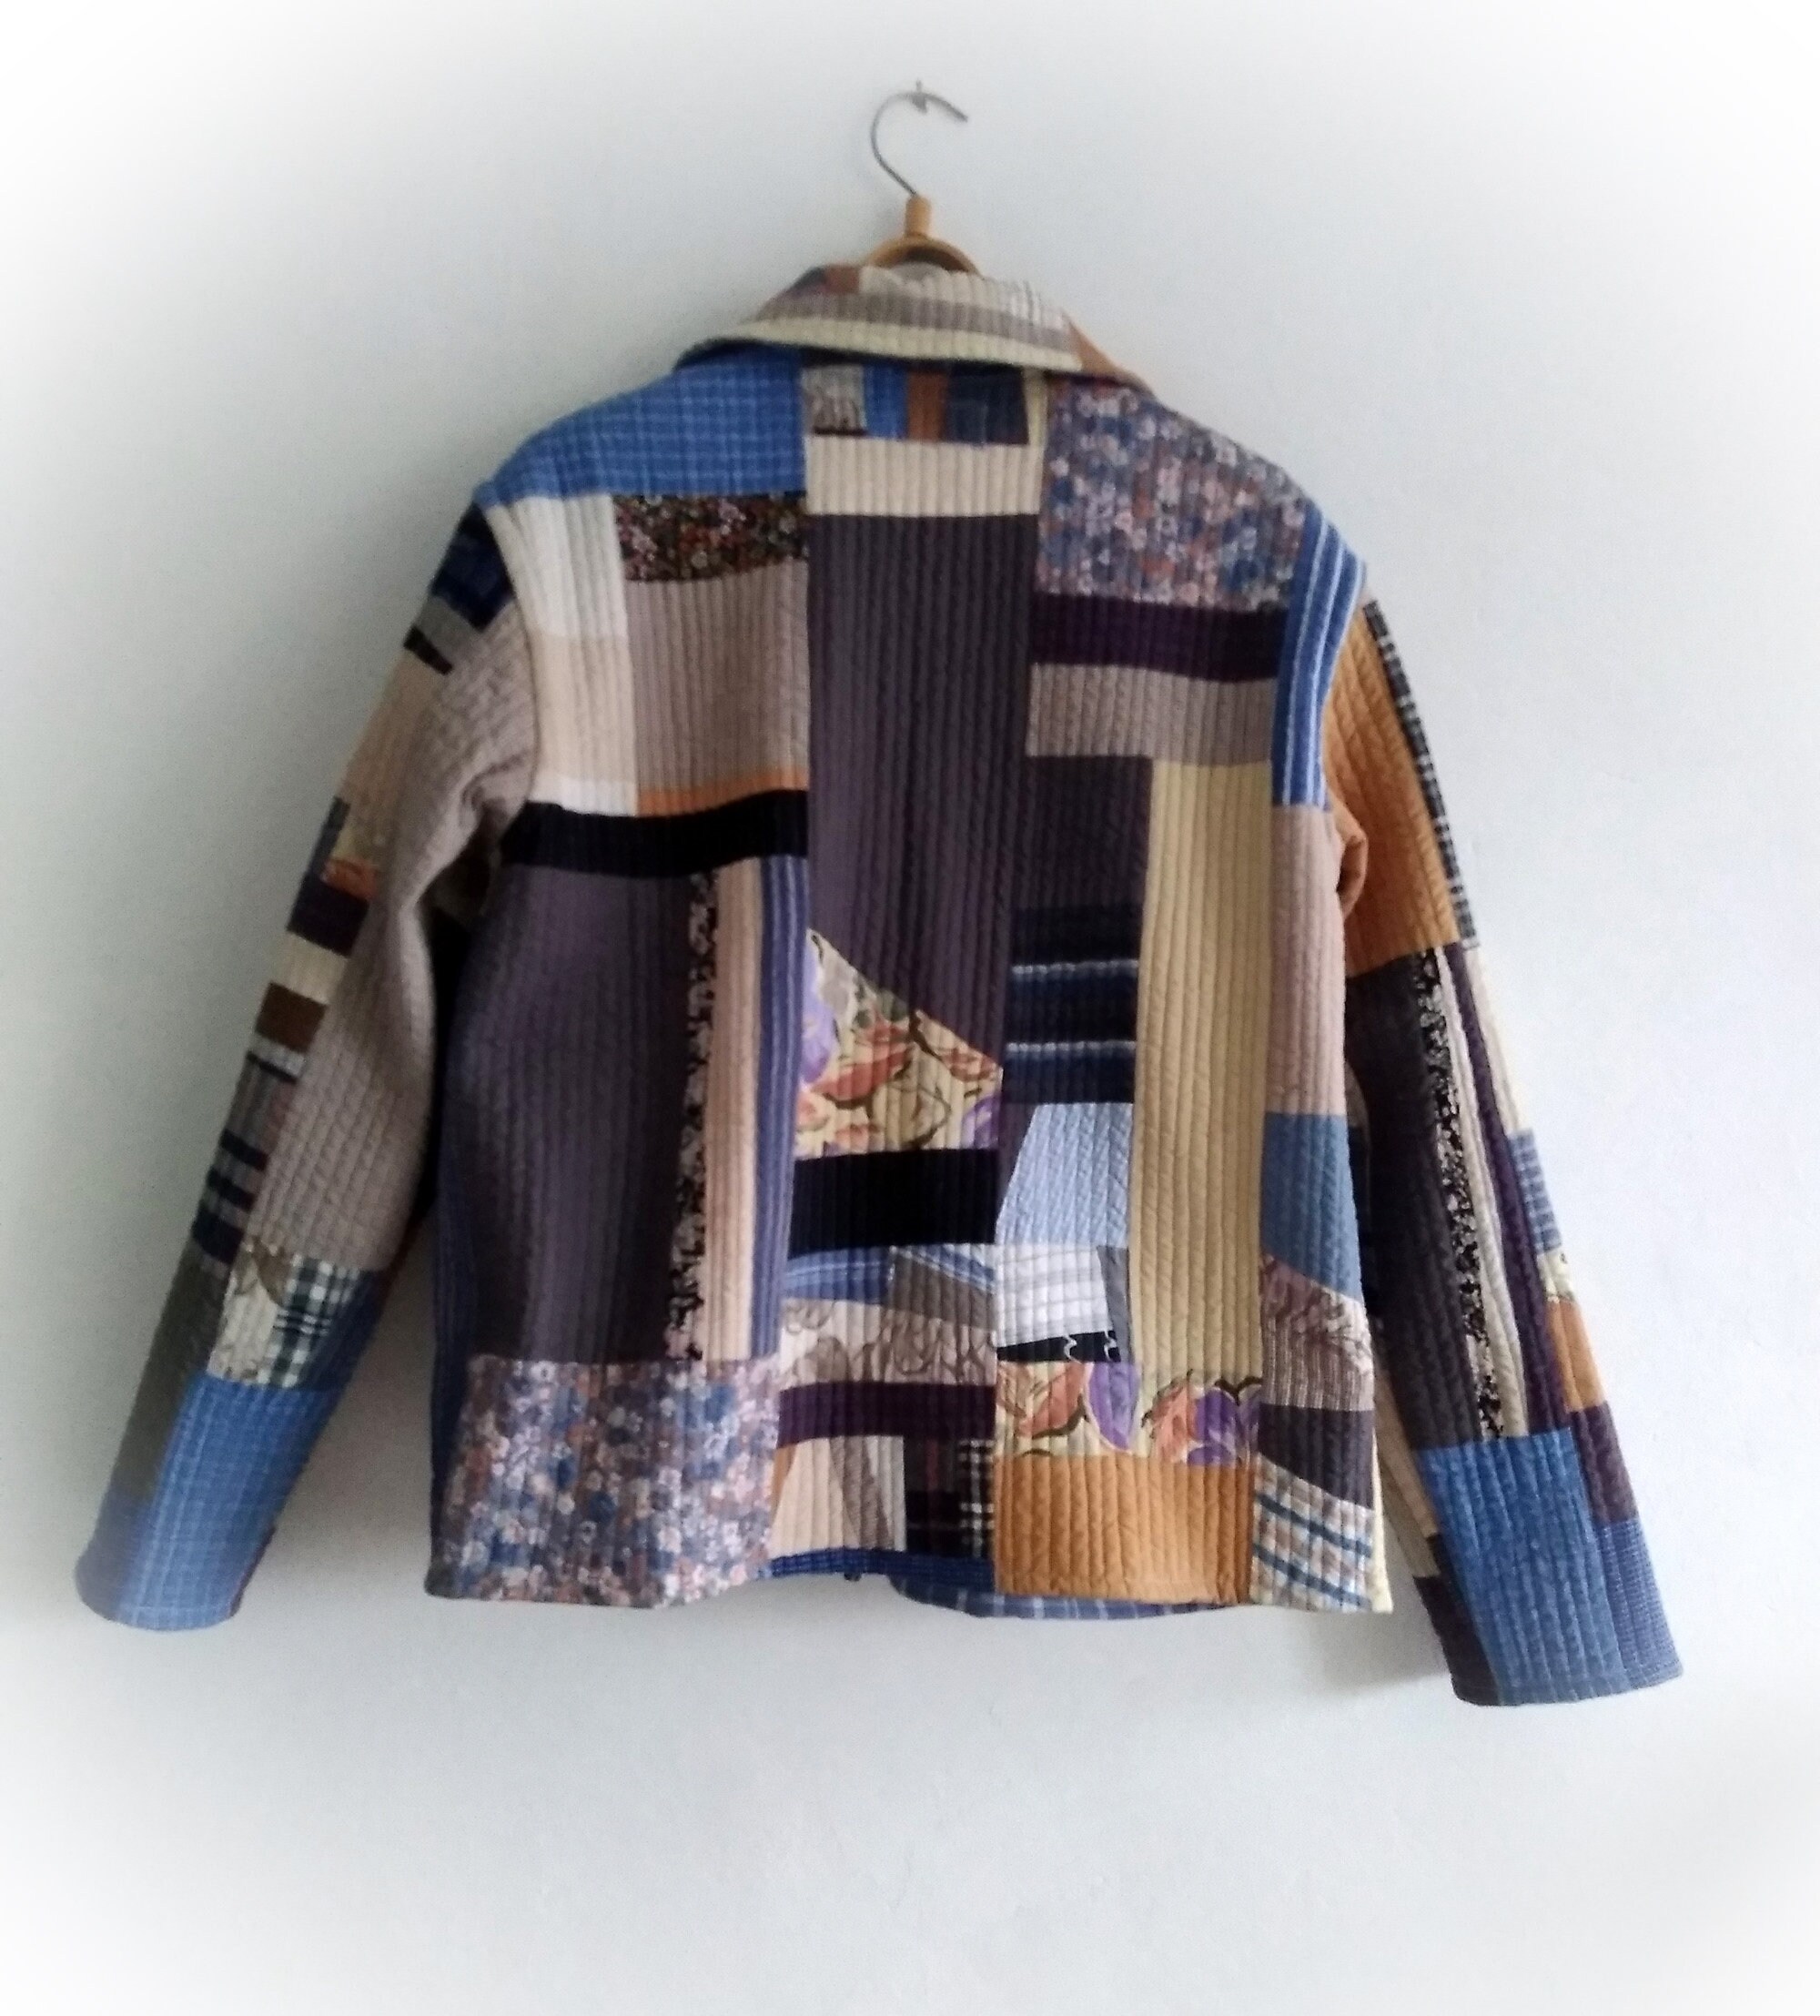 New Handcrafted Quilted Coat, Patchwork Guilt Jacket, Women's Cotton ...